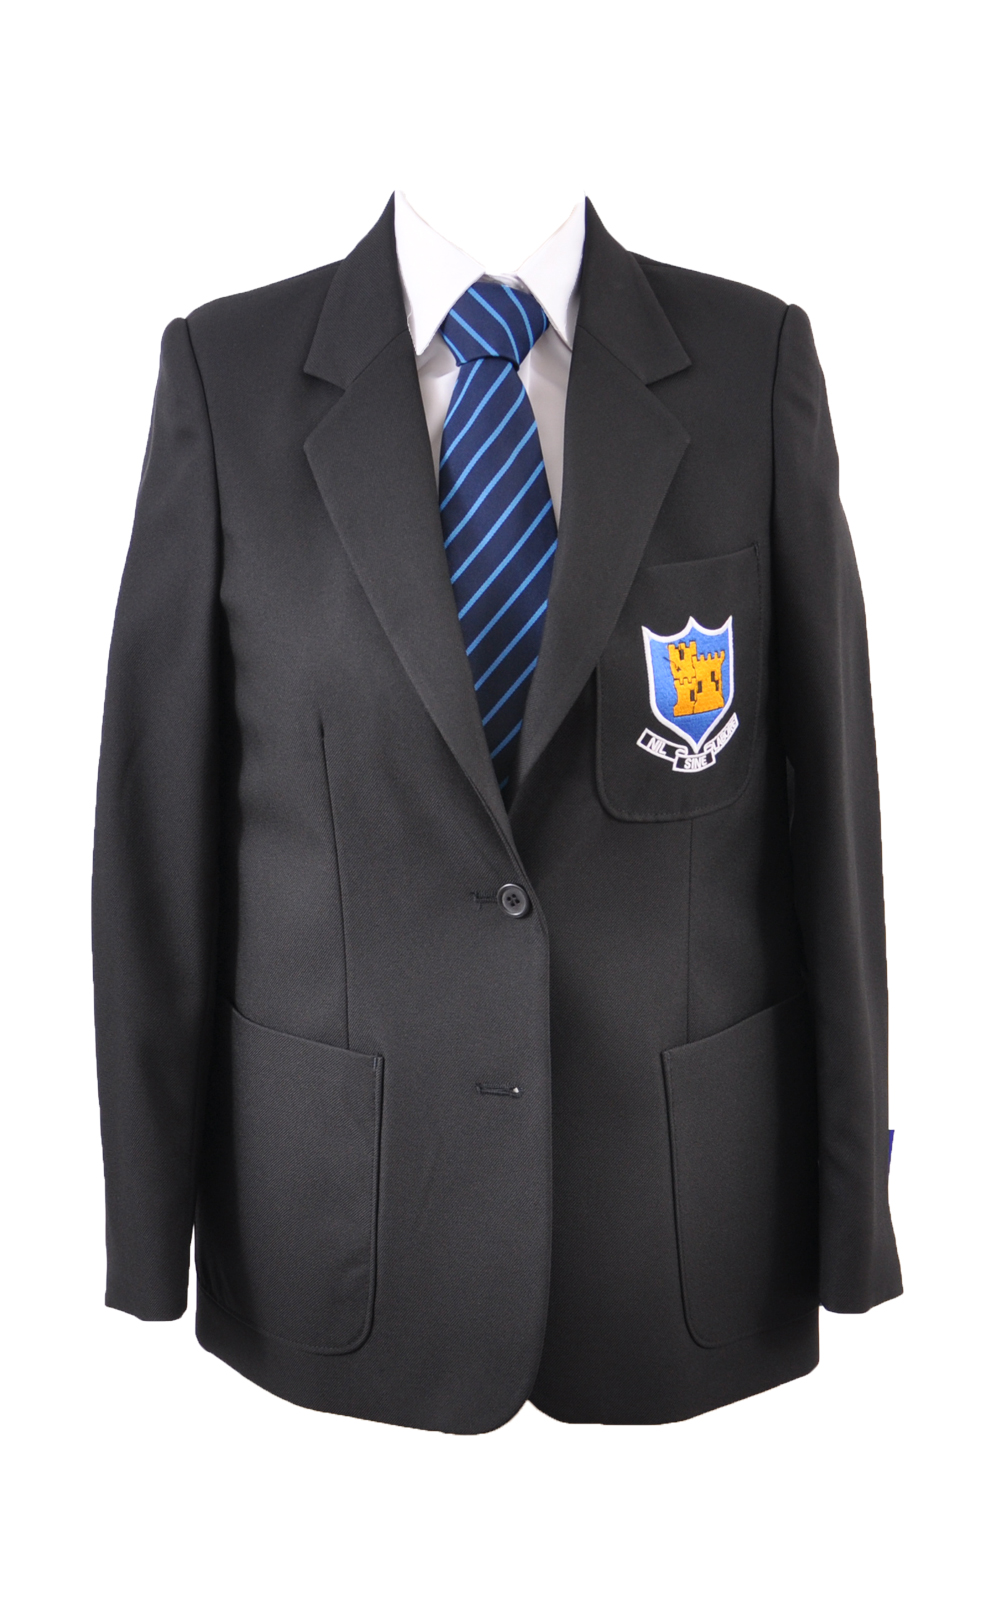 Picture of Ballycastle HS Girls Blazer - S&T